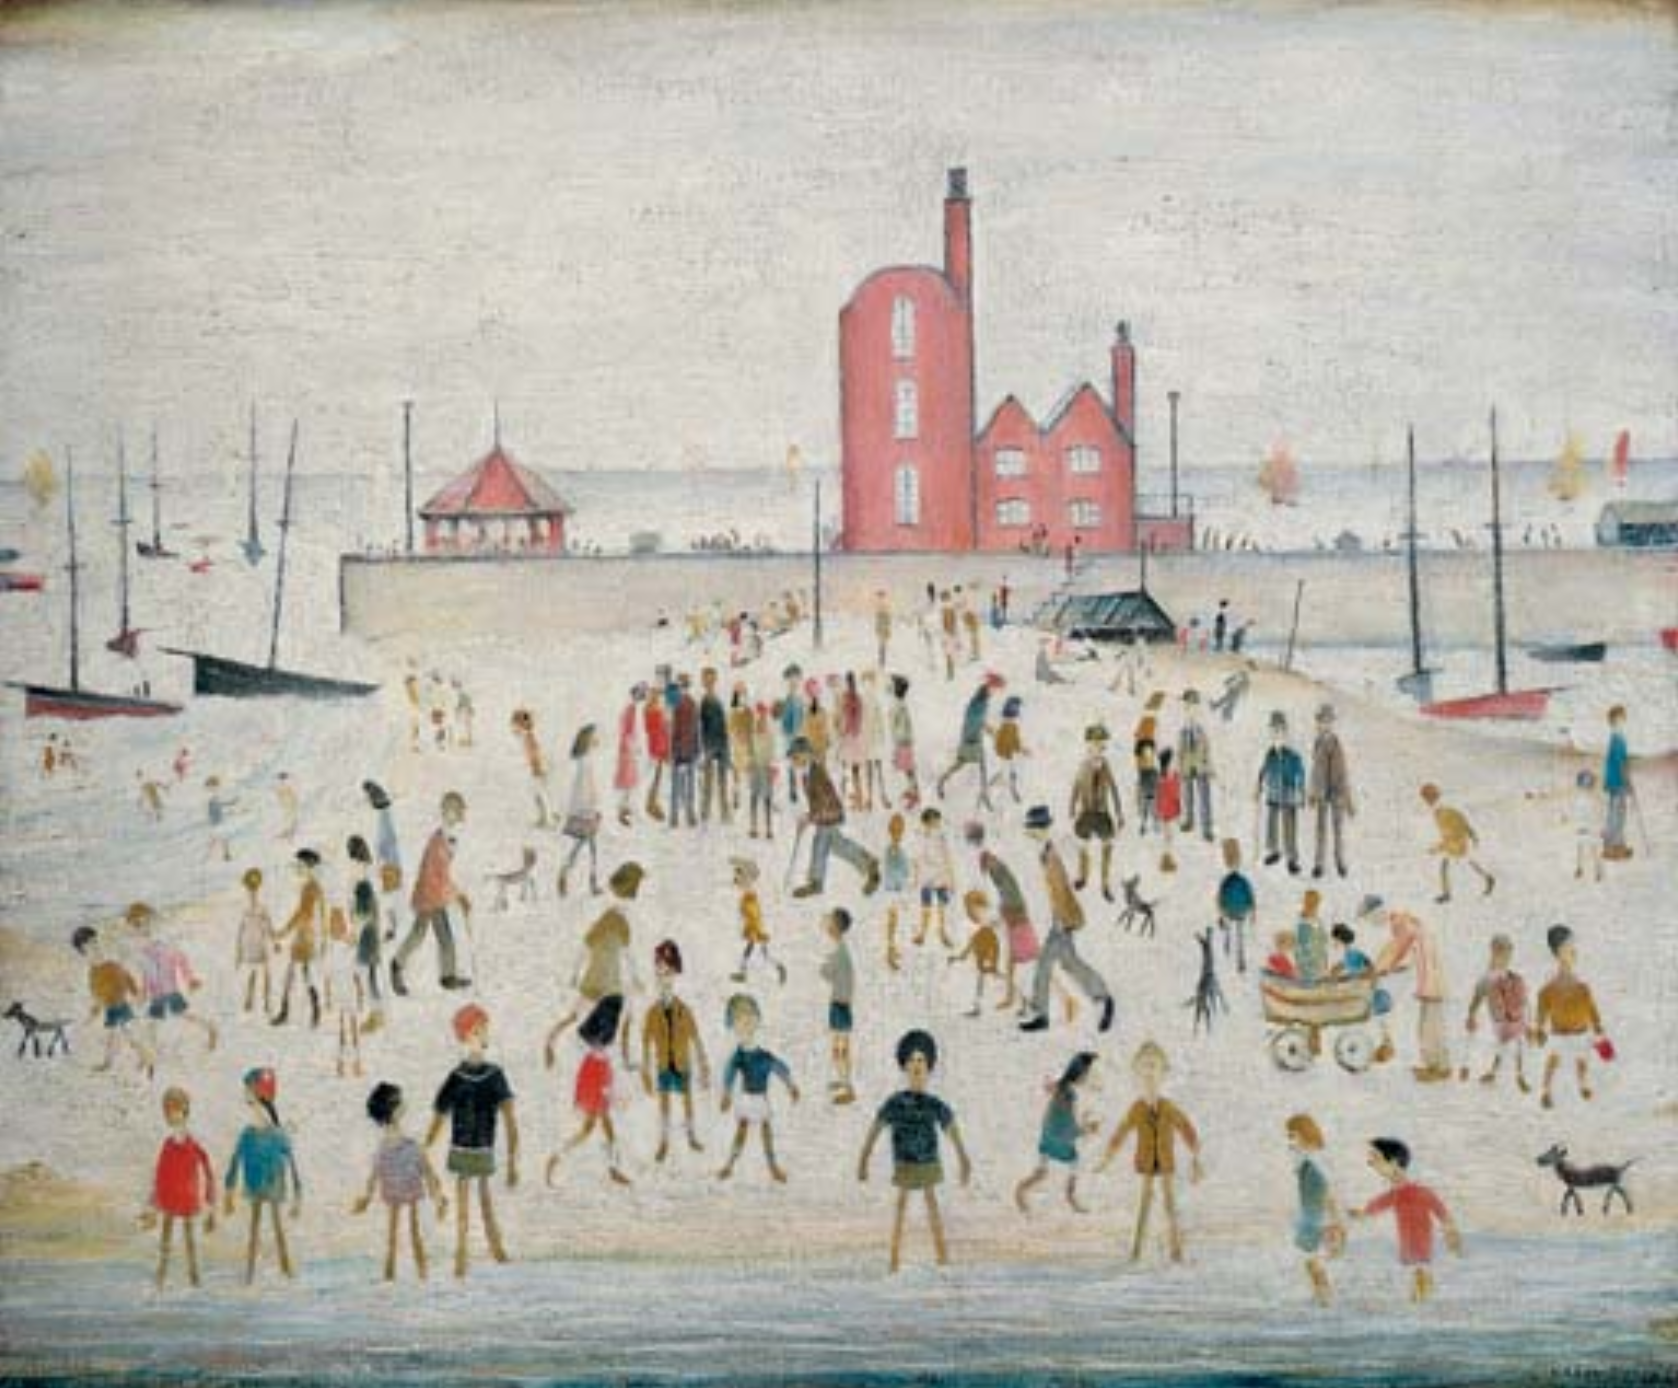 Beach and Promenade (1948) by Laurence Stephen Lowry (1887 - 1976), English artist.